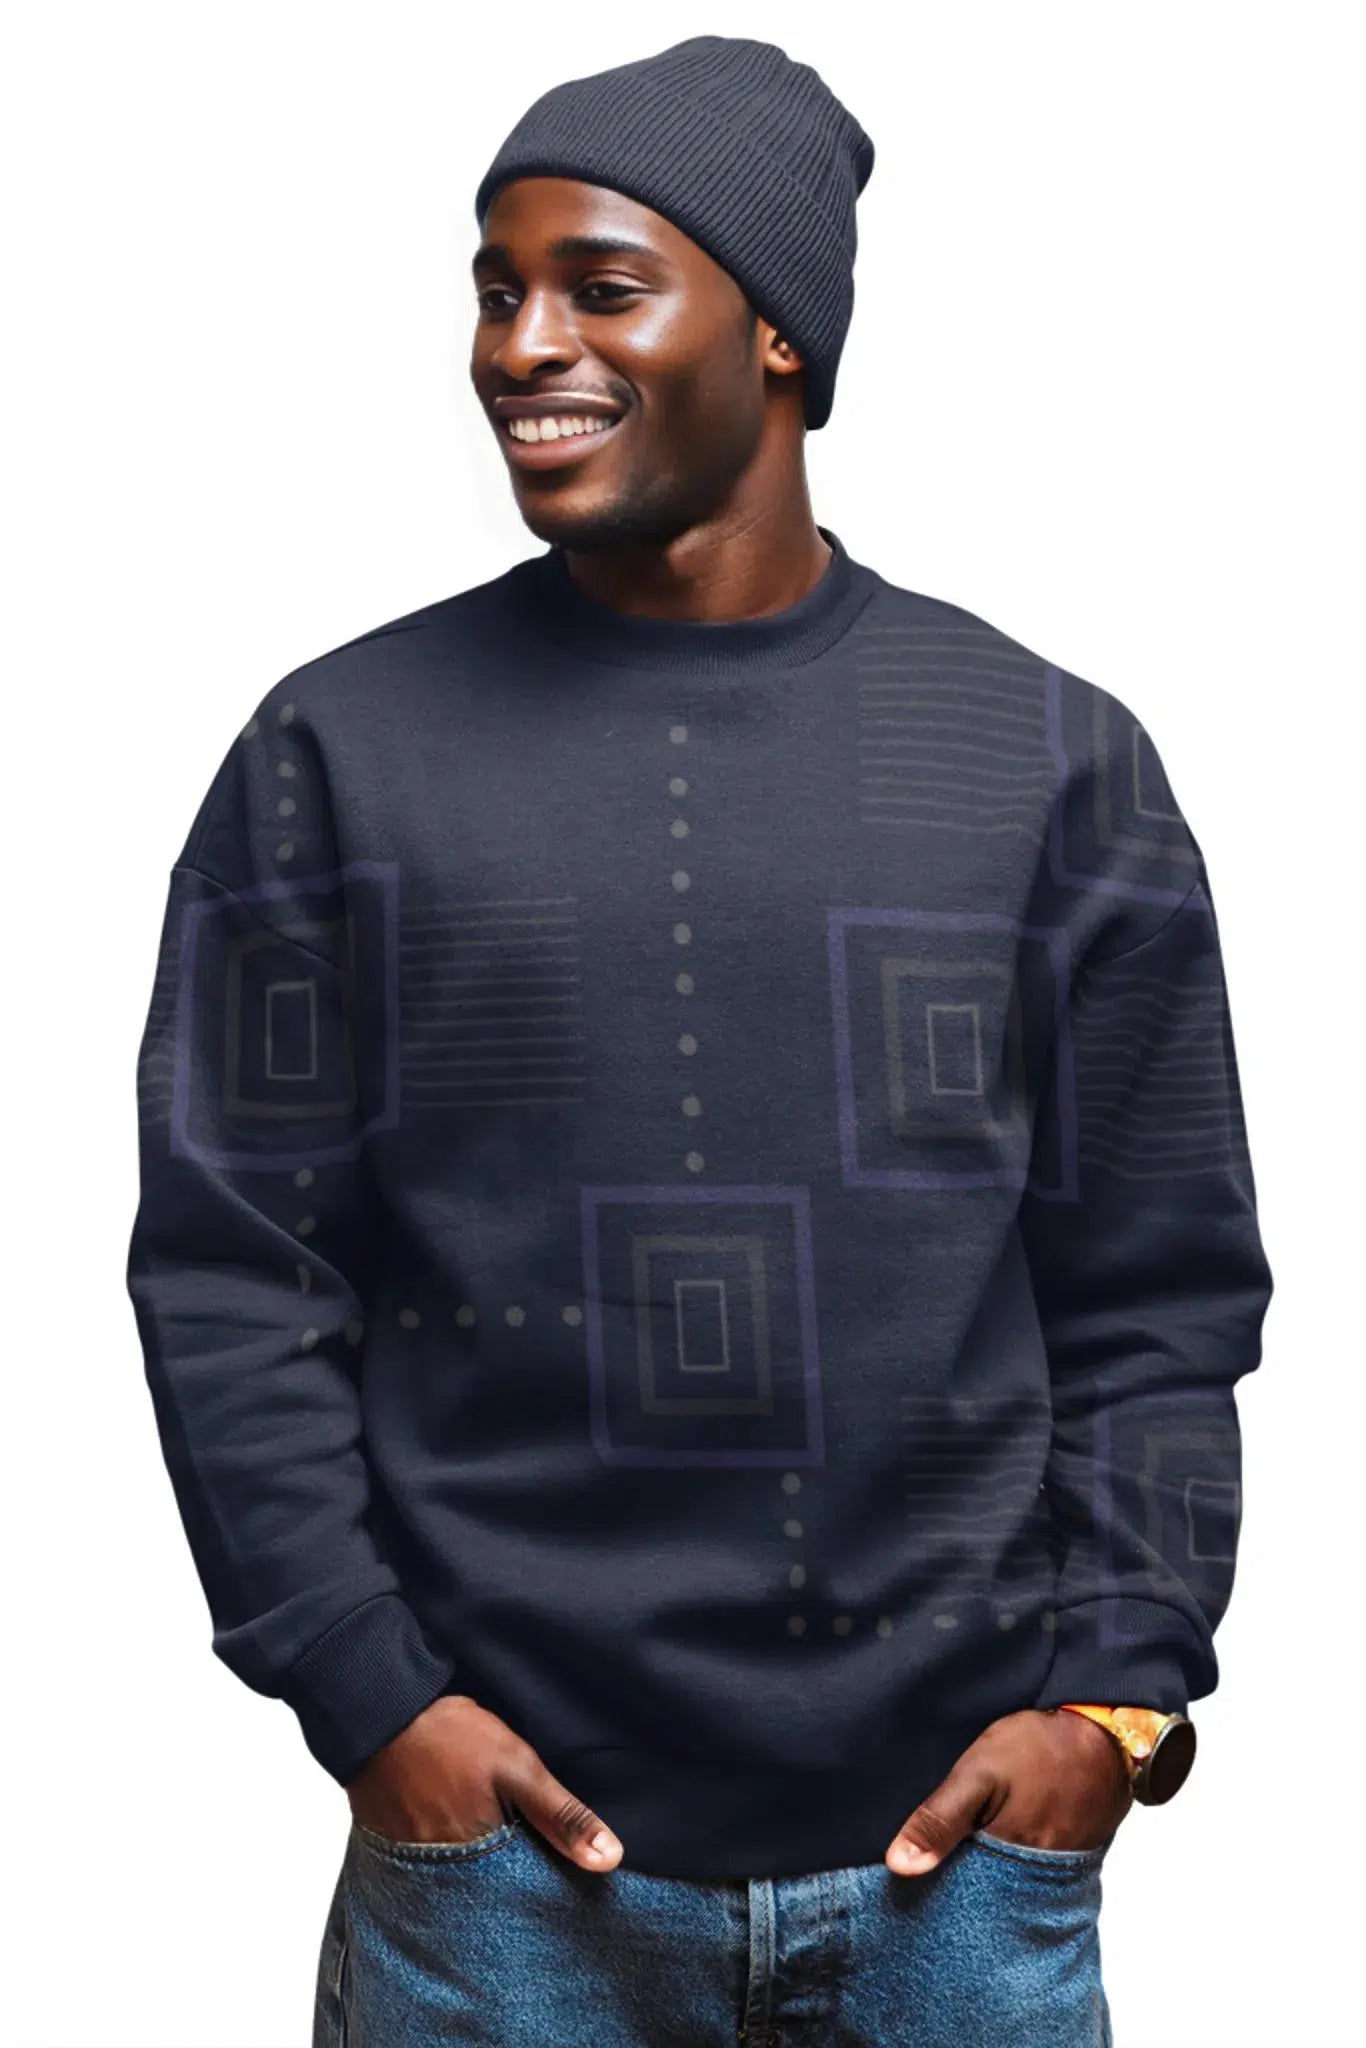 mens African style African print shirts for guys | Lapis